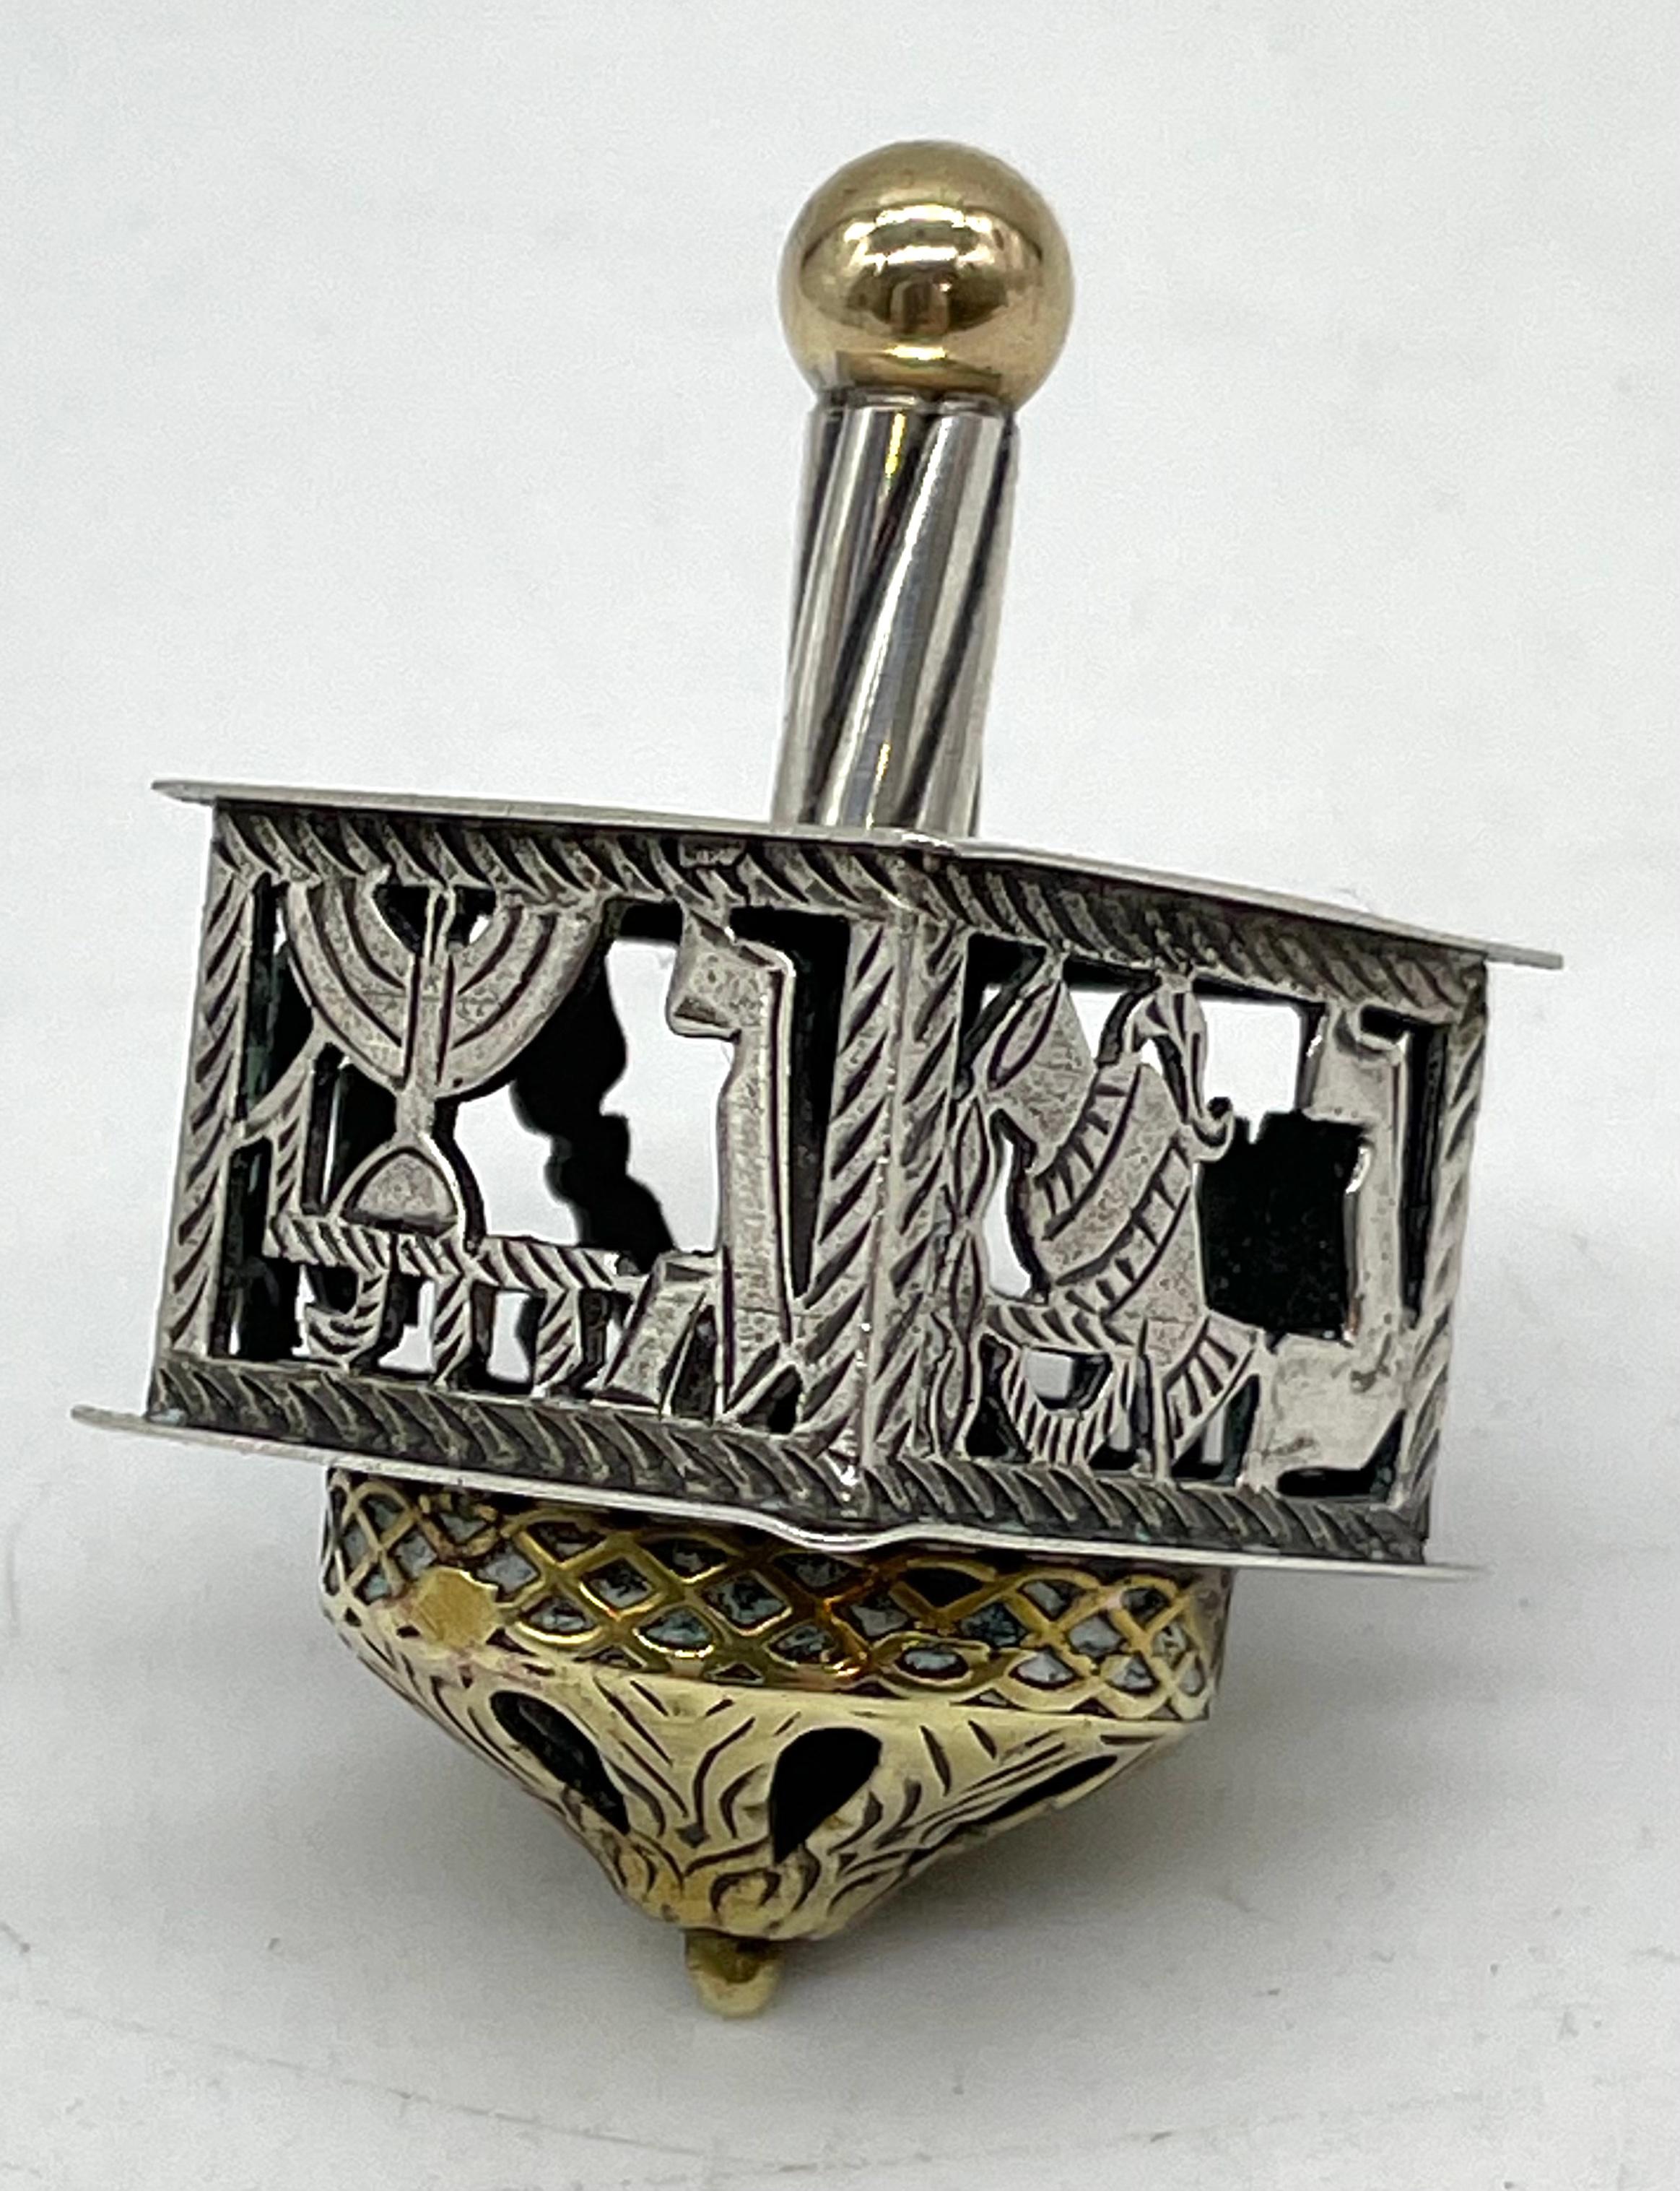 Handmade sterling silver Hanukkah dreidel, Jerusalem, Israel, circa 1955. Stamped with Israeli silver hallmarks with gilded top and bottom. The four letters nun, heh, gimel, shin on each flank represent Nes gadol haya sham, meaning 